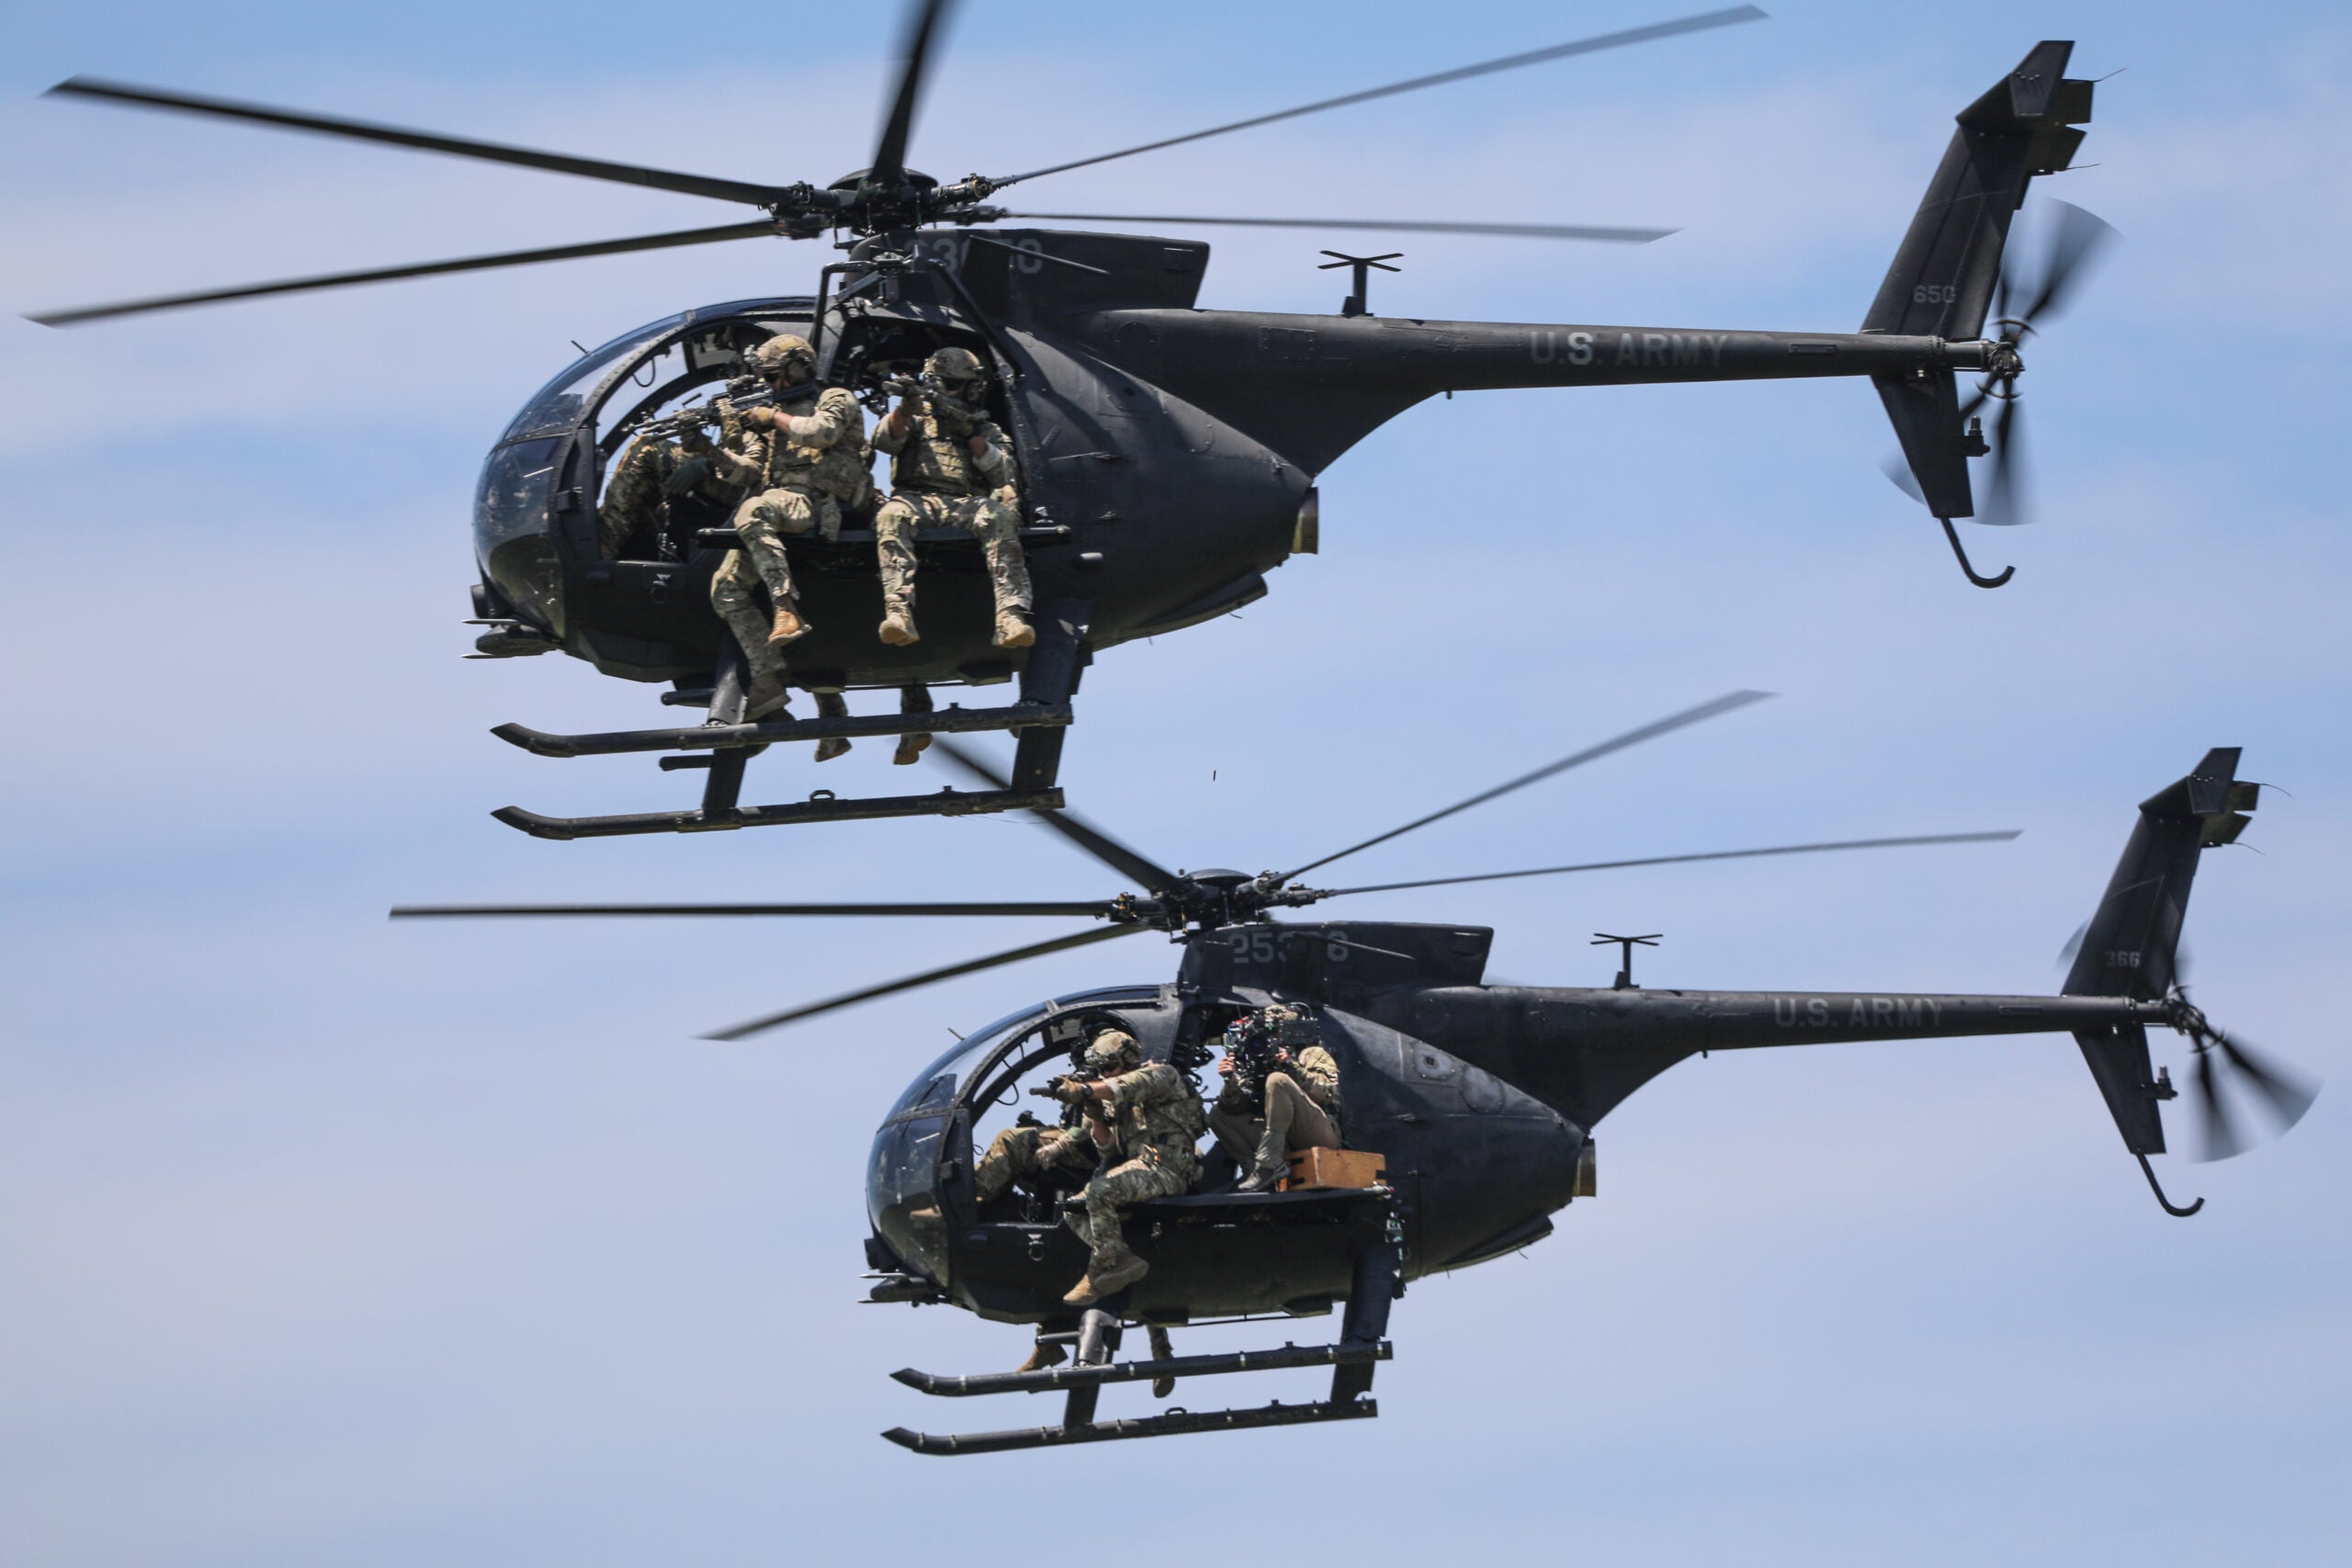 U.S. Army Rangers from 75th Ranger Regiment and 160th Special Operations Aviation Regiment (Airborne) conduct training operations in support of the Army Marketing Research Group's "Warriors Wanted" campaign at Fort Campbell, Ky, on July 19, 2018. Image Used in the Special Operations Recruiting Battalion Campaign.